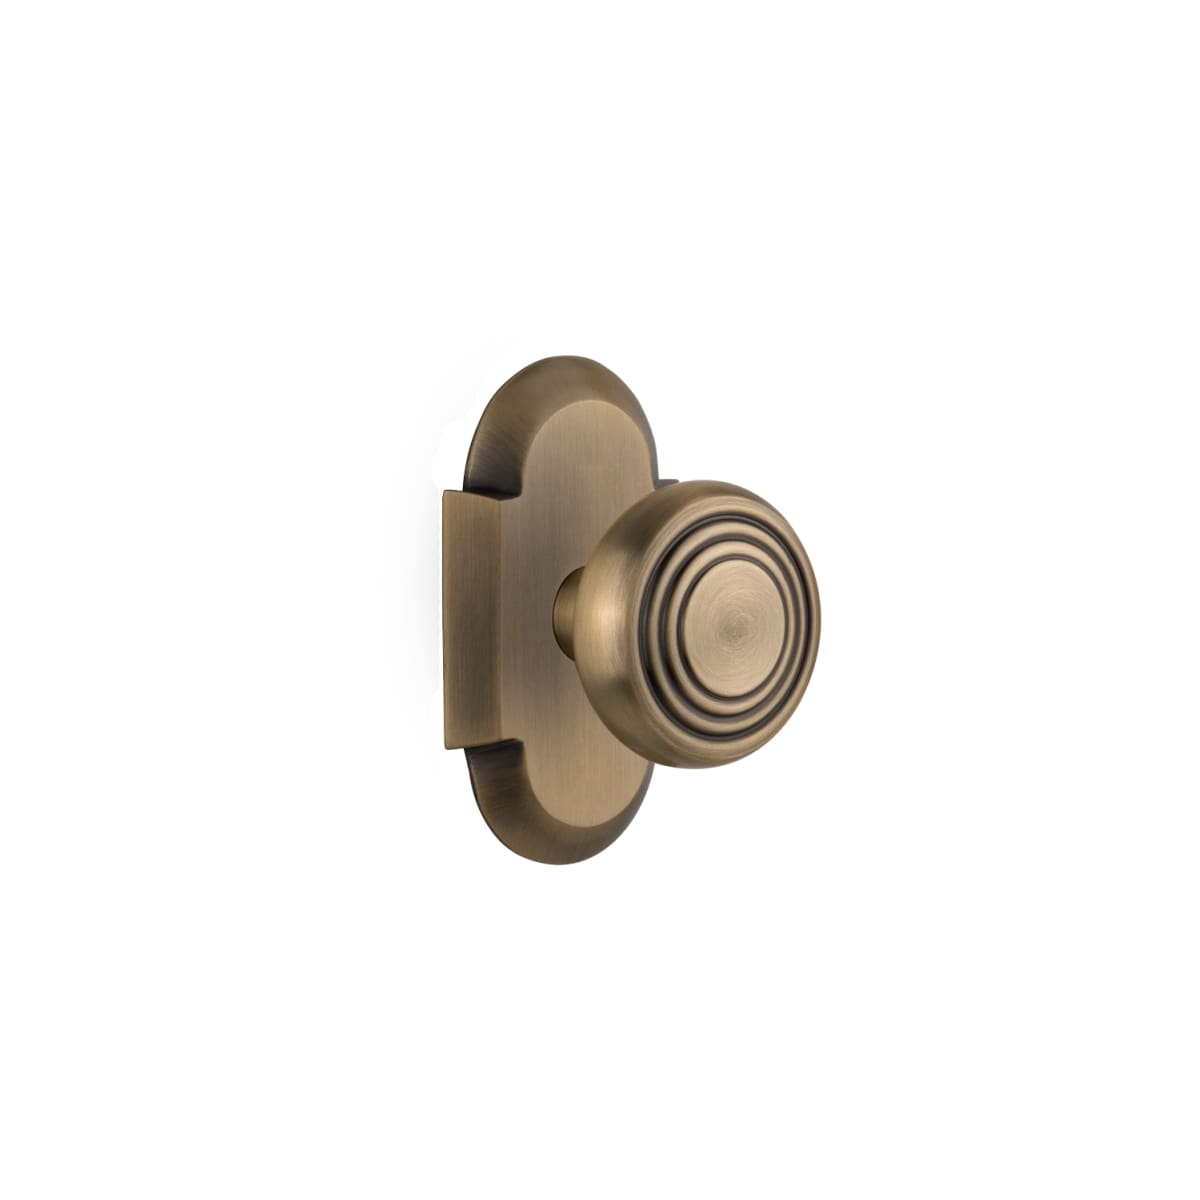 Prime-Line Products N 7370 1-3/4-Inch Bi-Fold Door Knob Antique Brass Plated